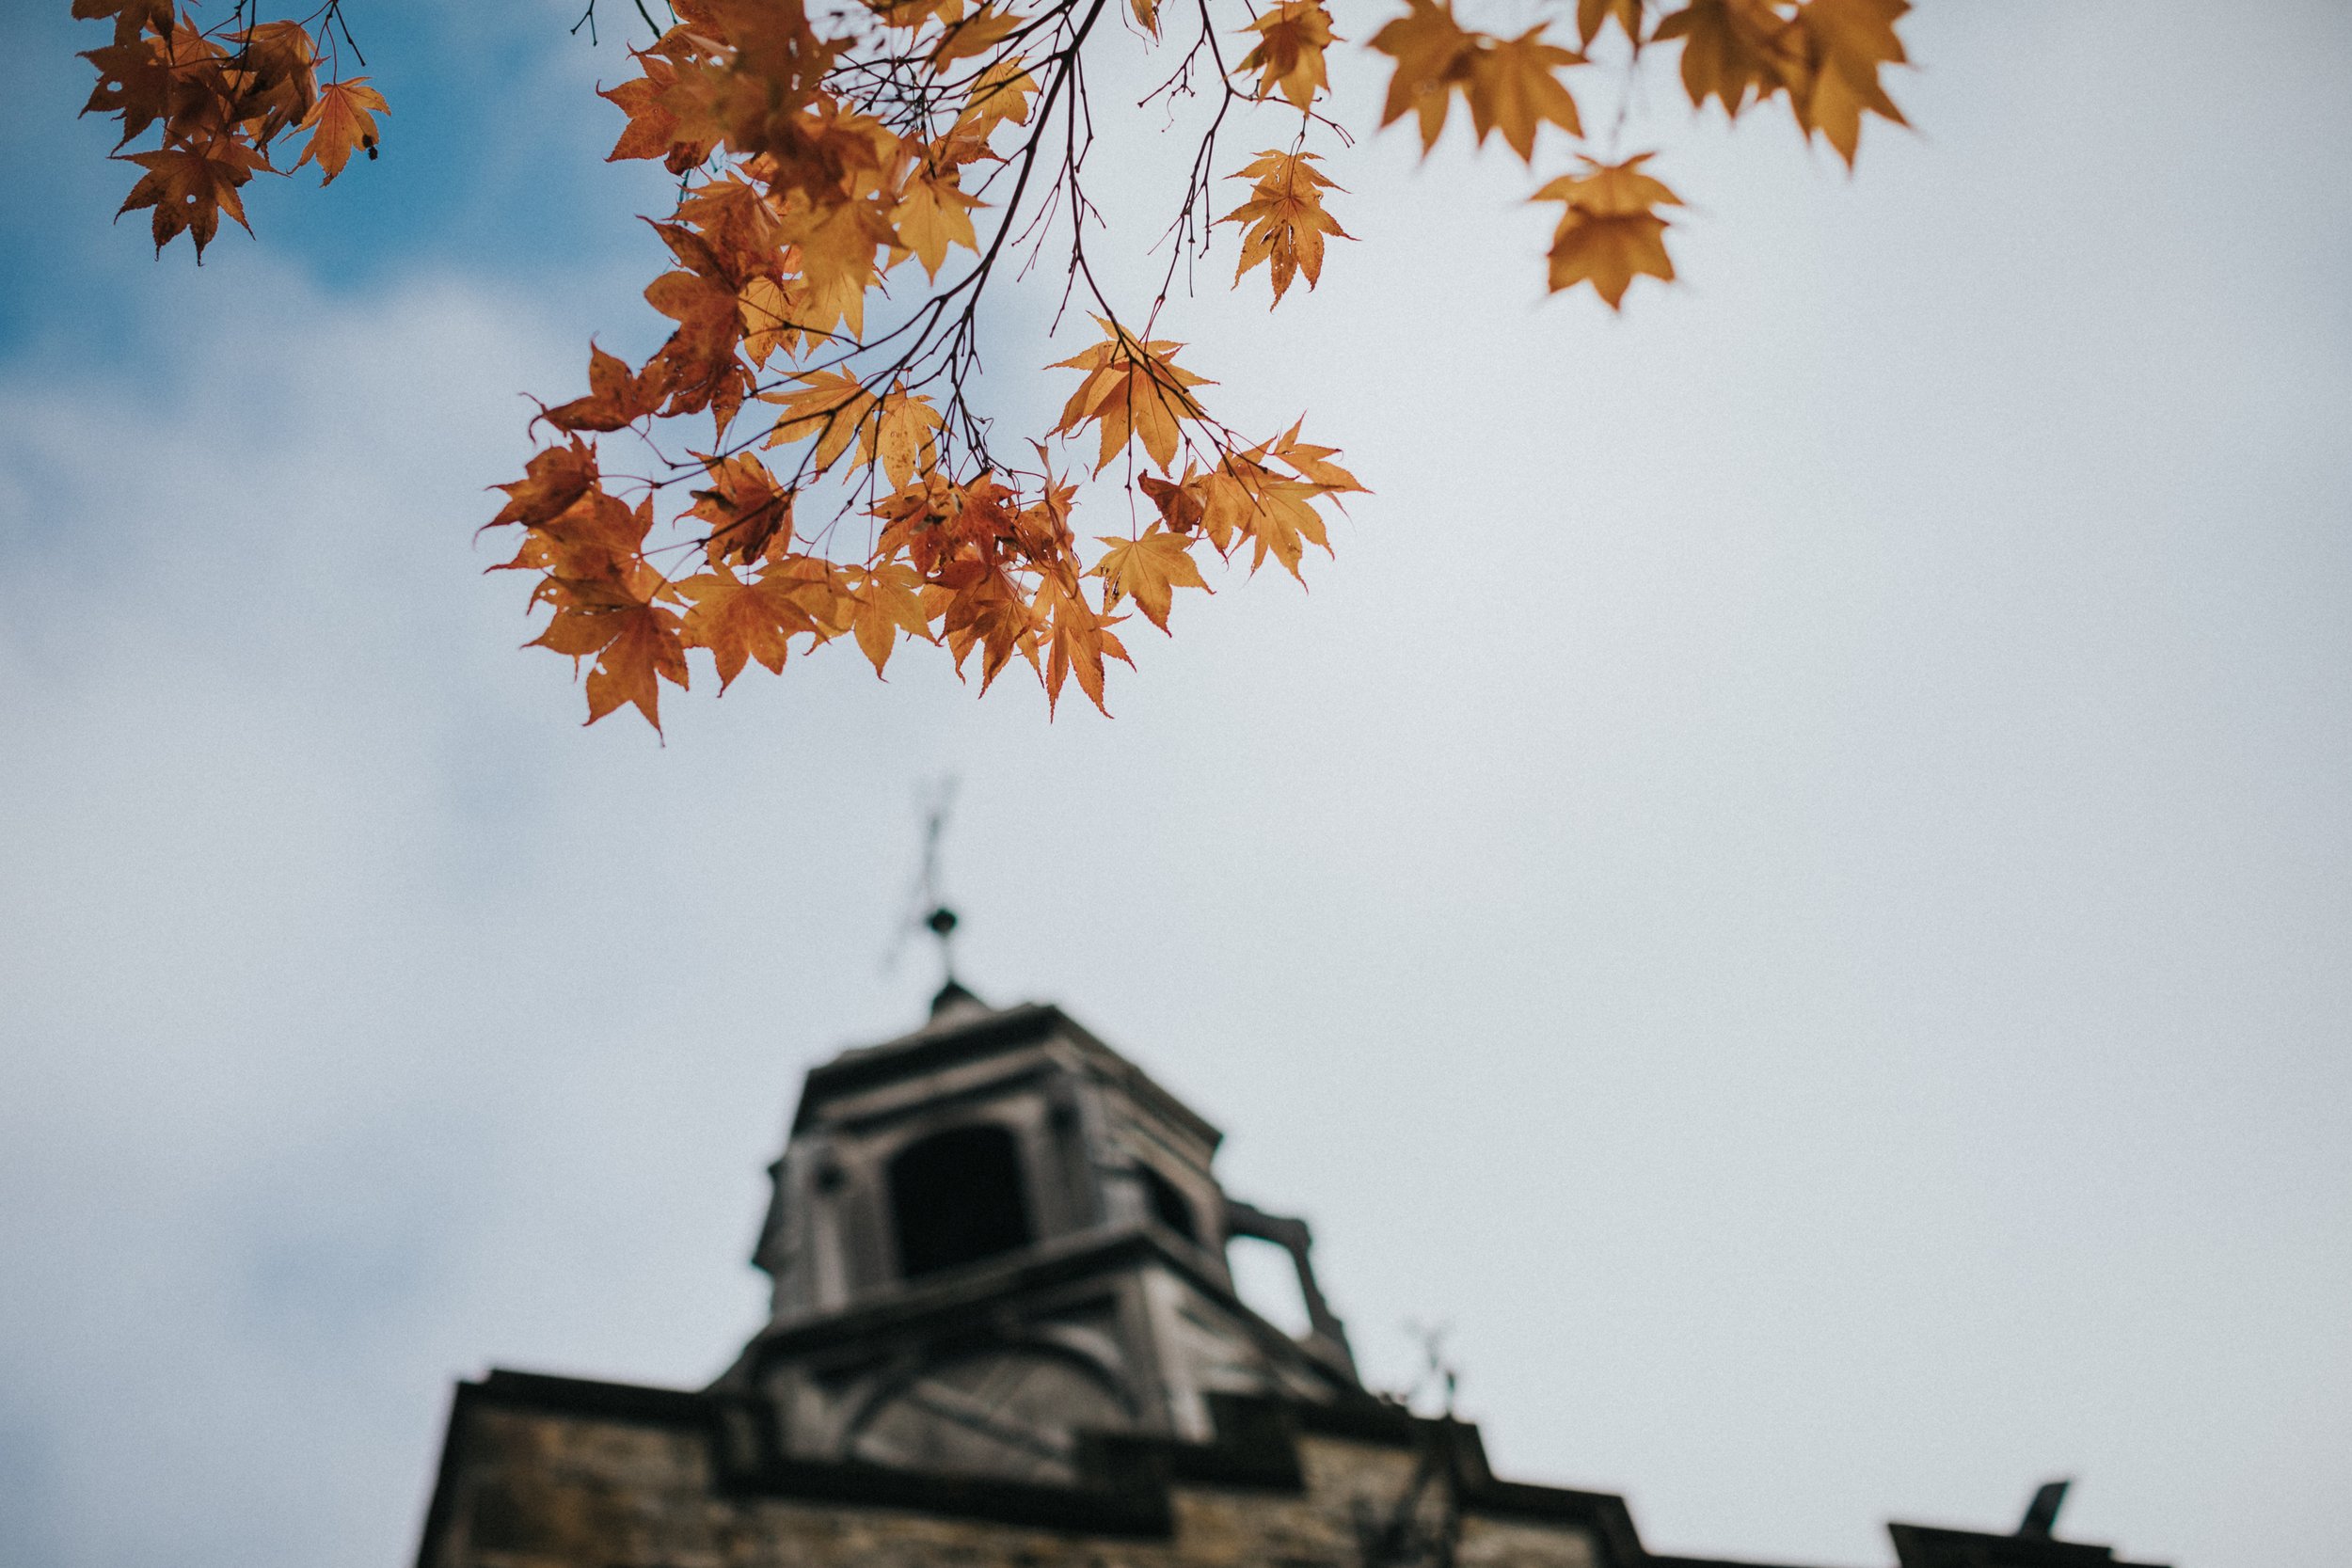 Autumn leaves with Carriage House clock tower in tower in the back ground. 